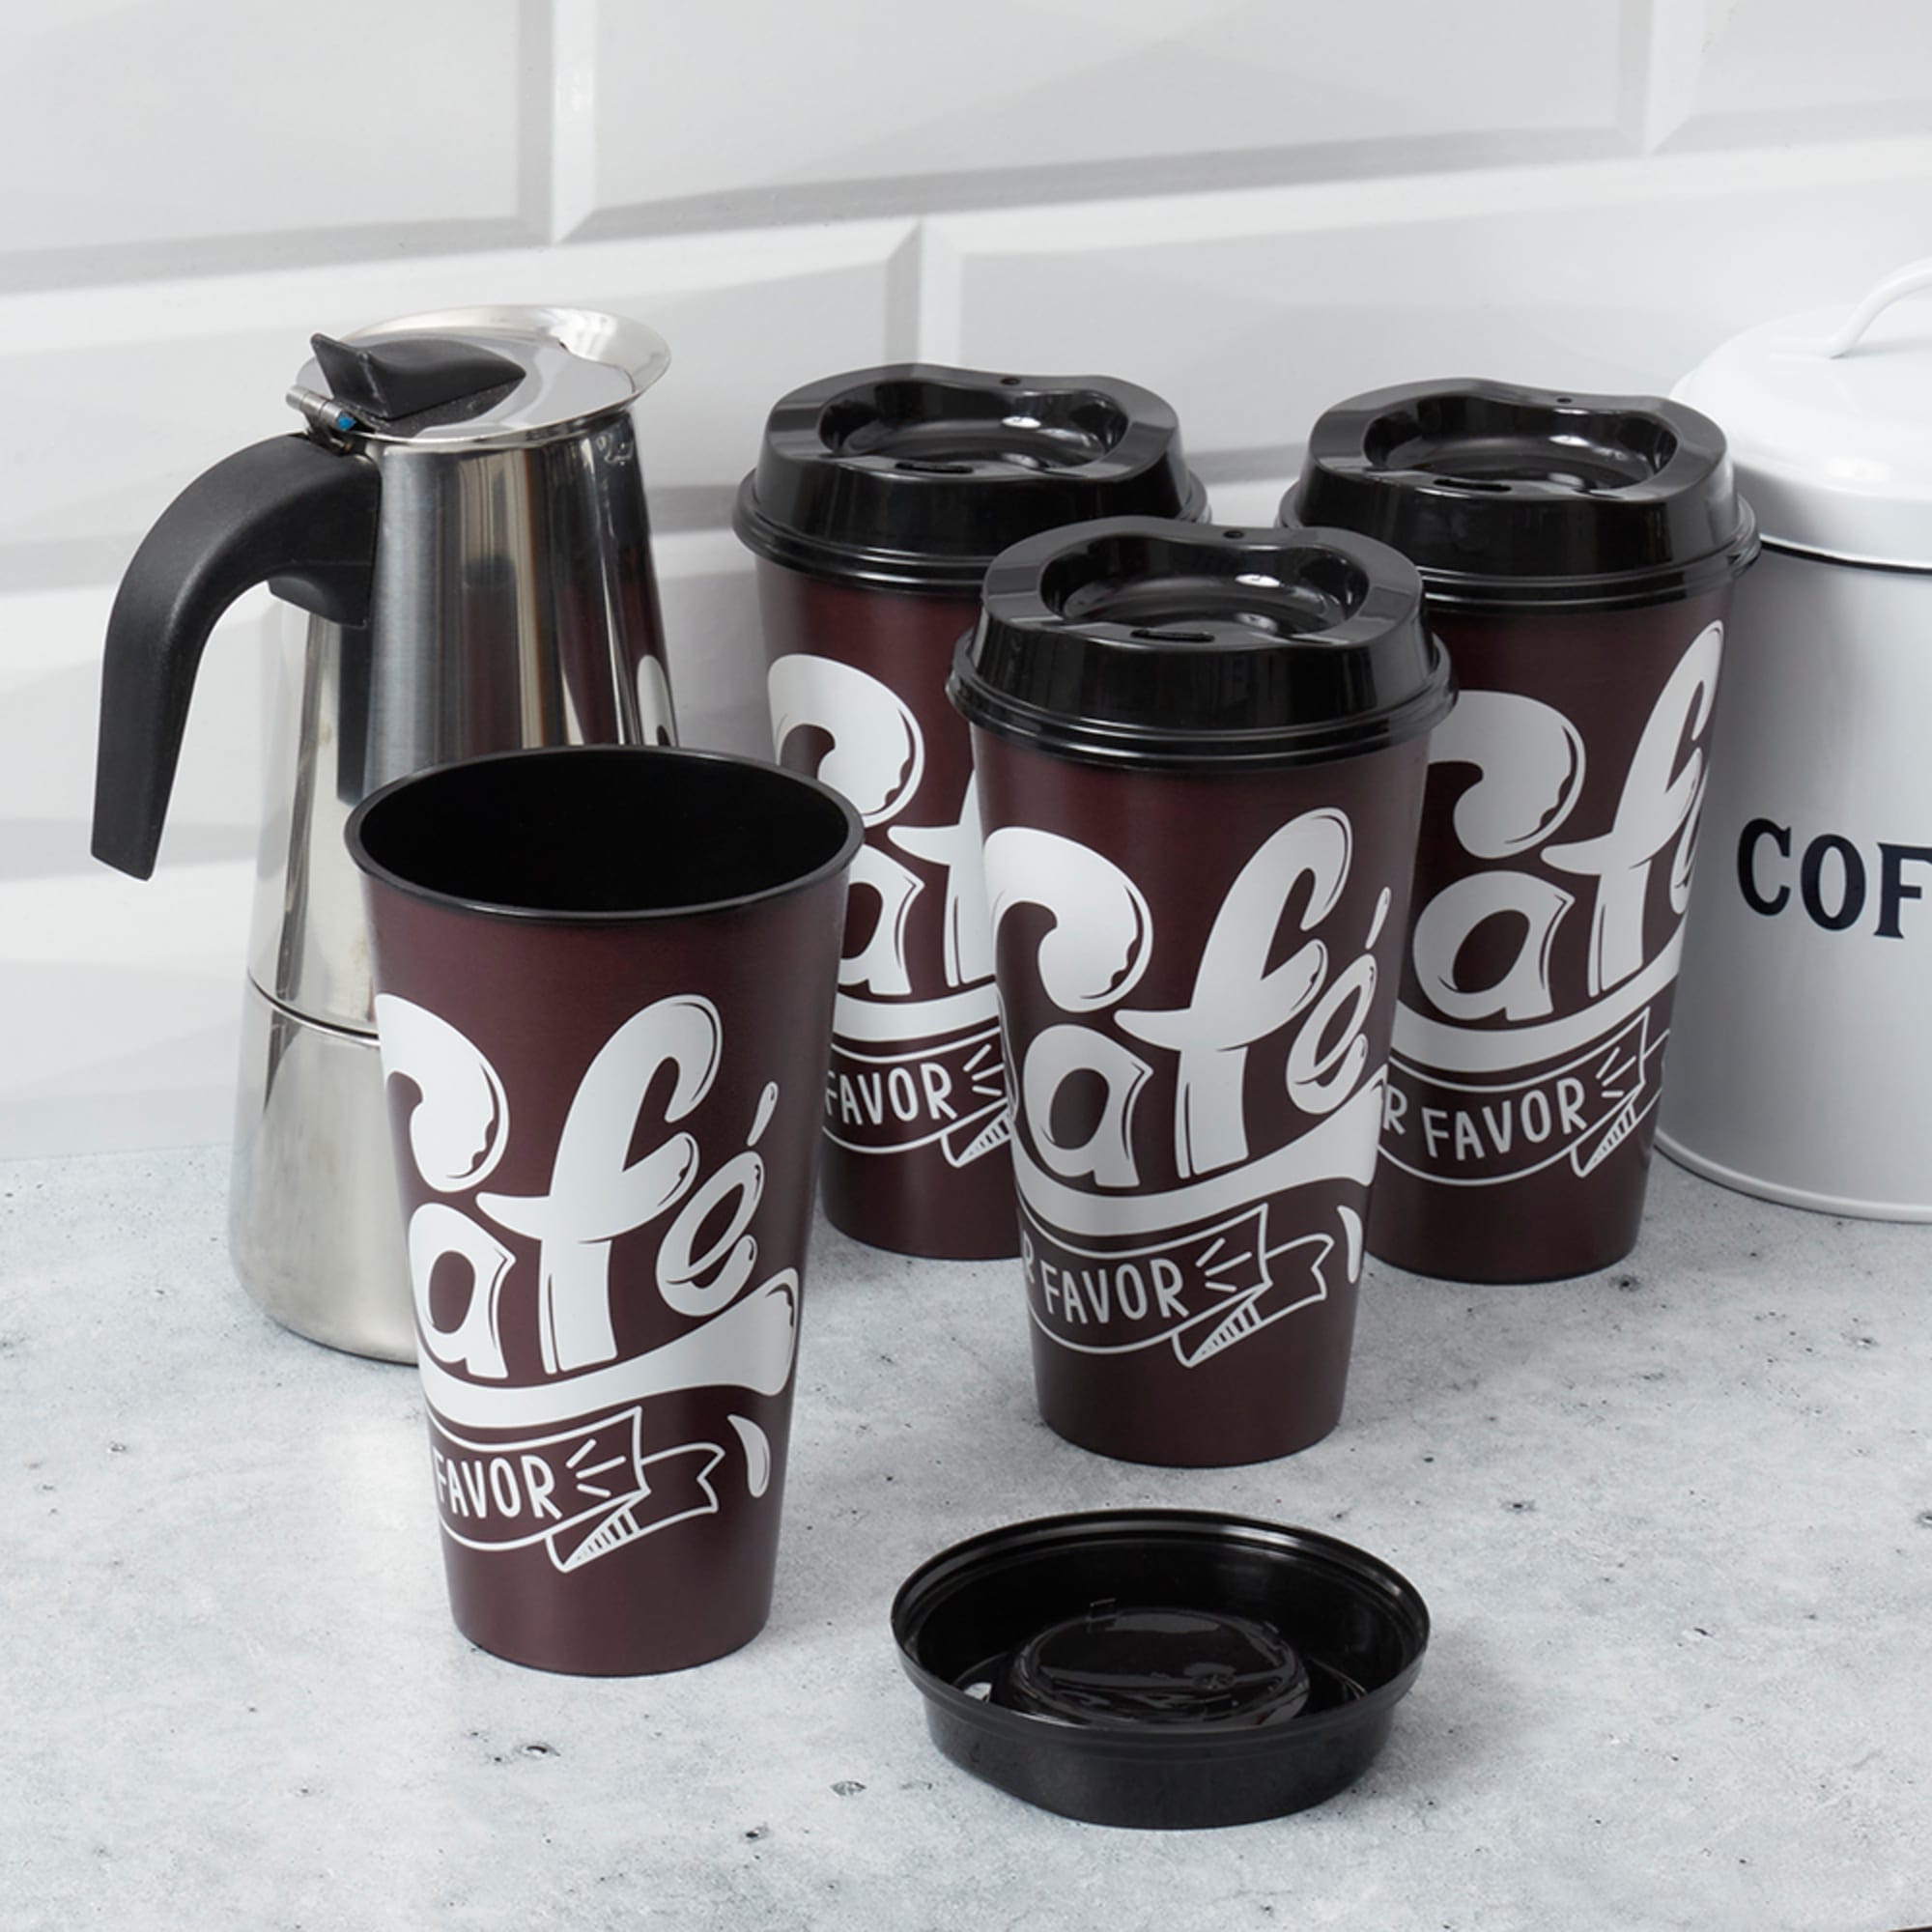 Home Basics 16 oz. 4-Pack of Reusable Plastic Coffee Cups With Lids, Brown, HYDRATION